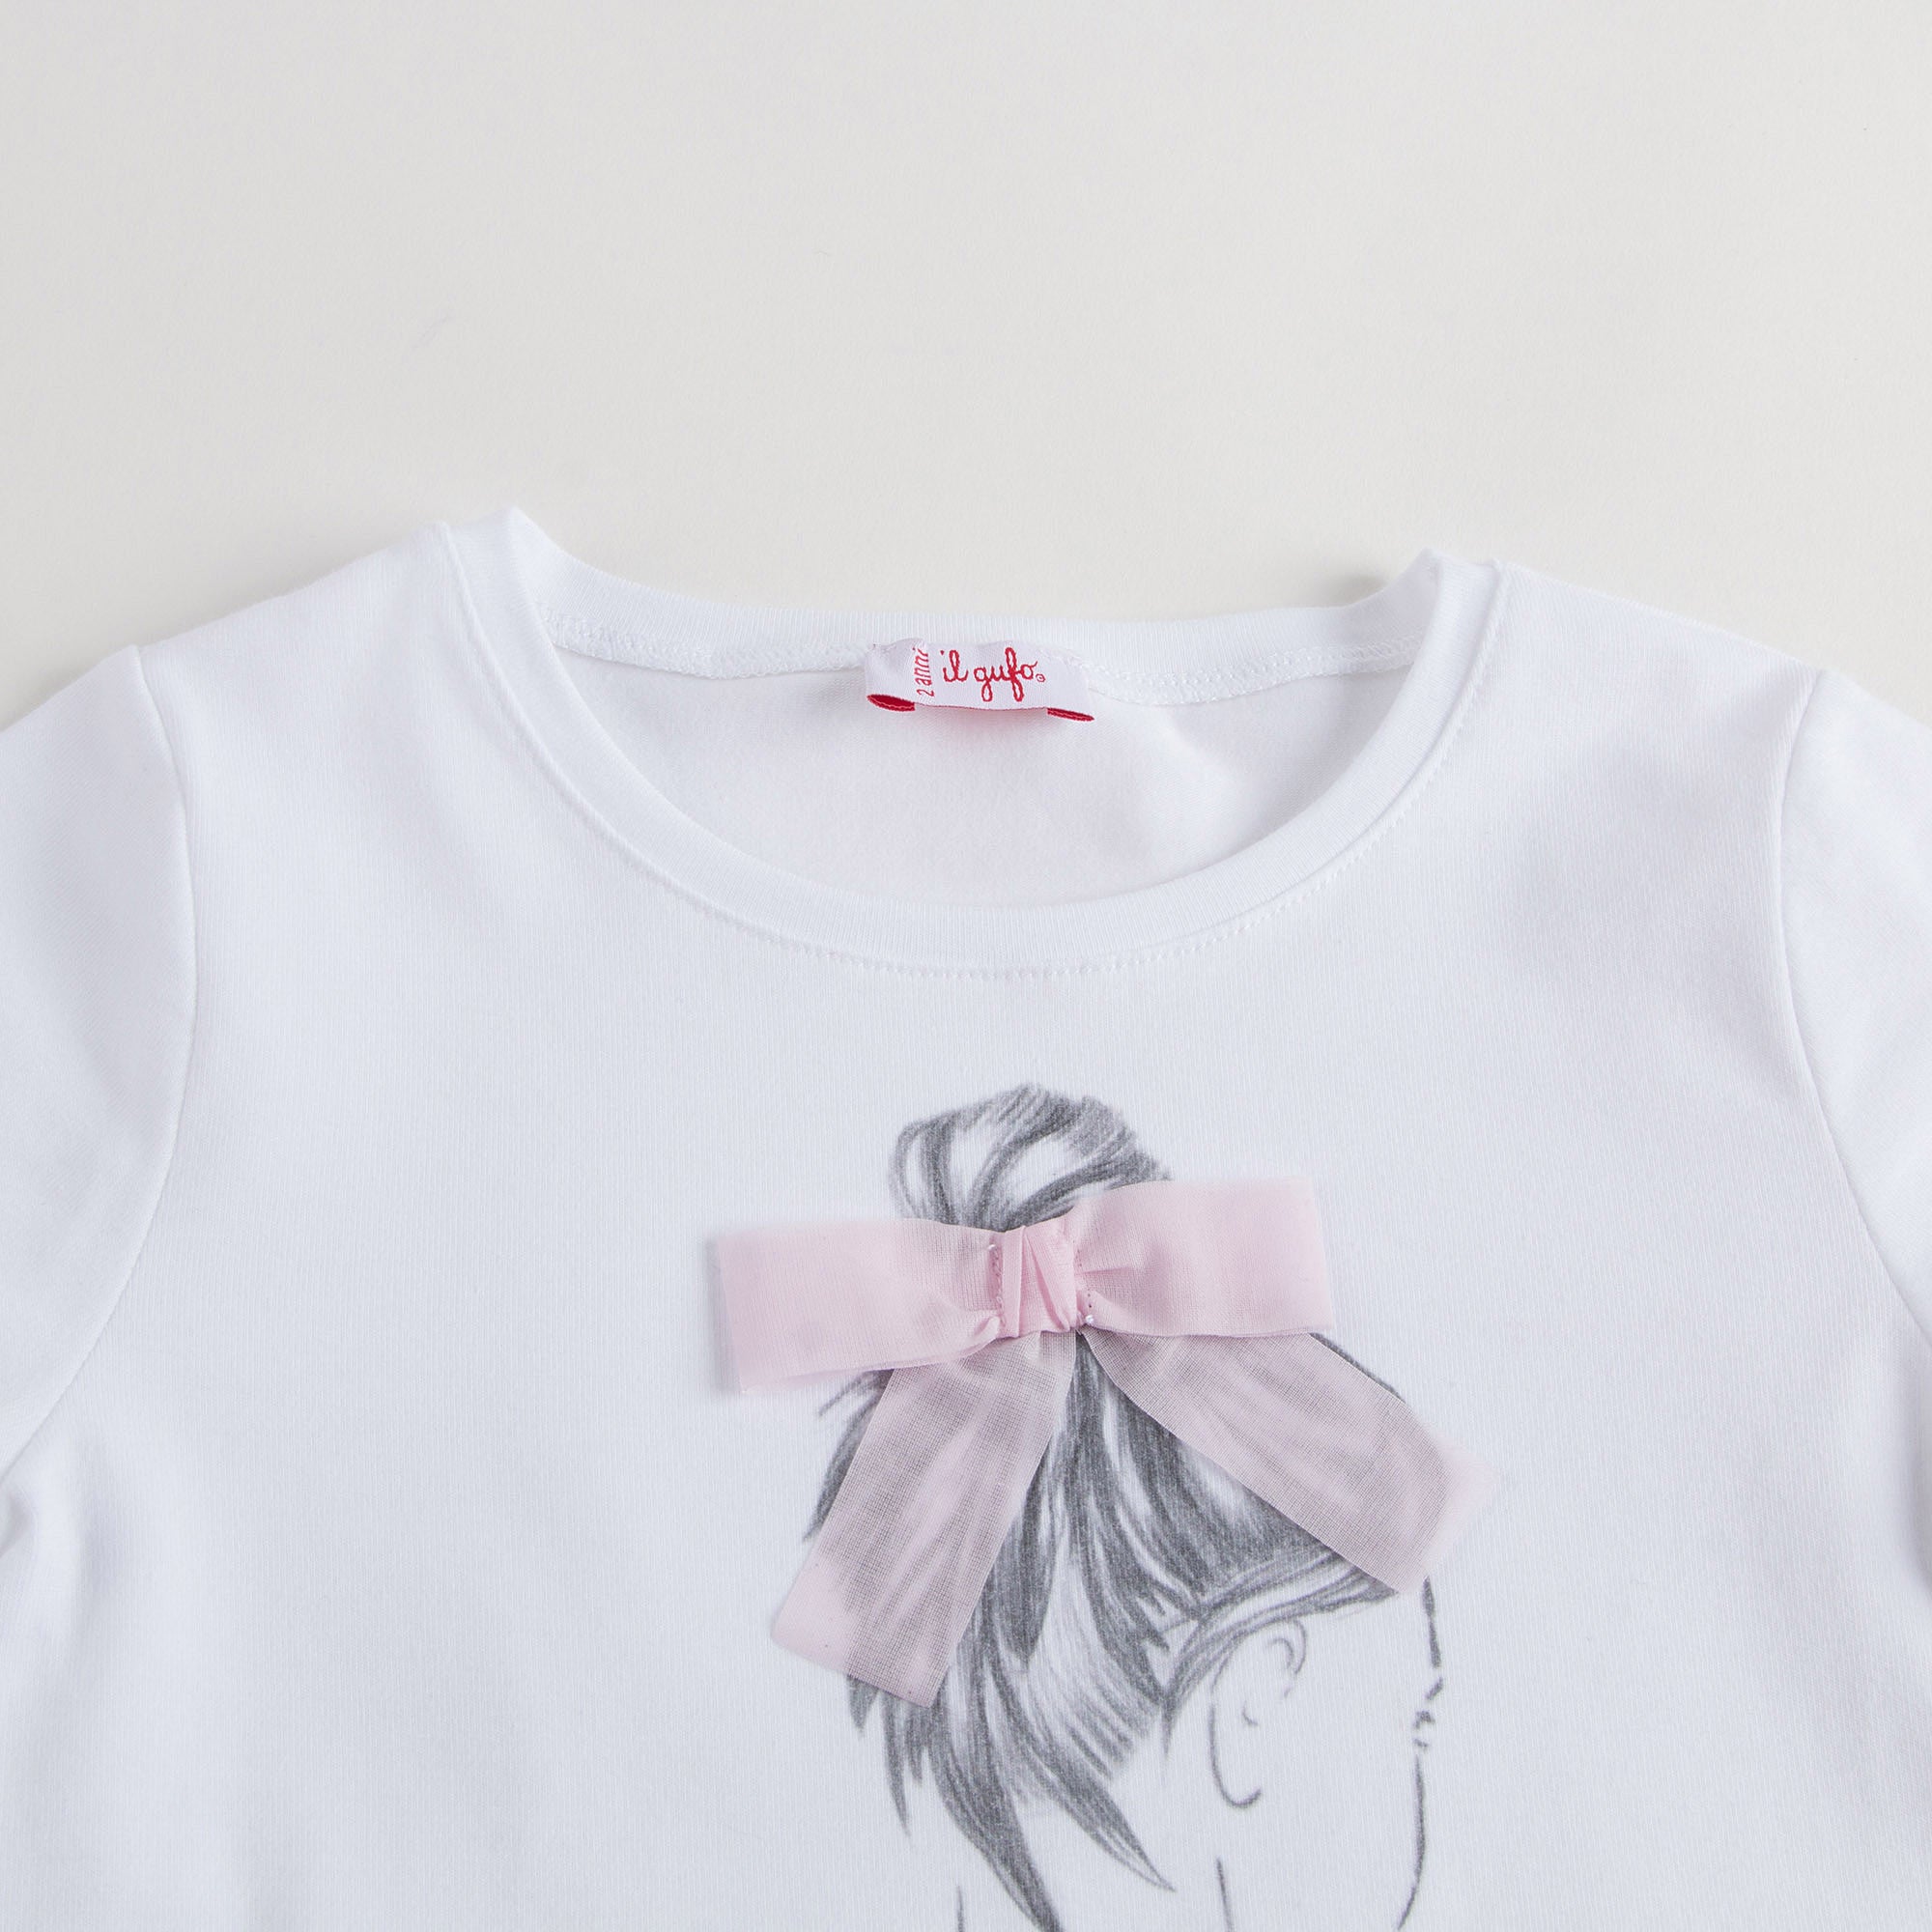 Girls White Cotton Jersey T-Shirt With Light Pink Bow - CÉMAROSE | Children's Fashion Store - 3